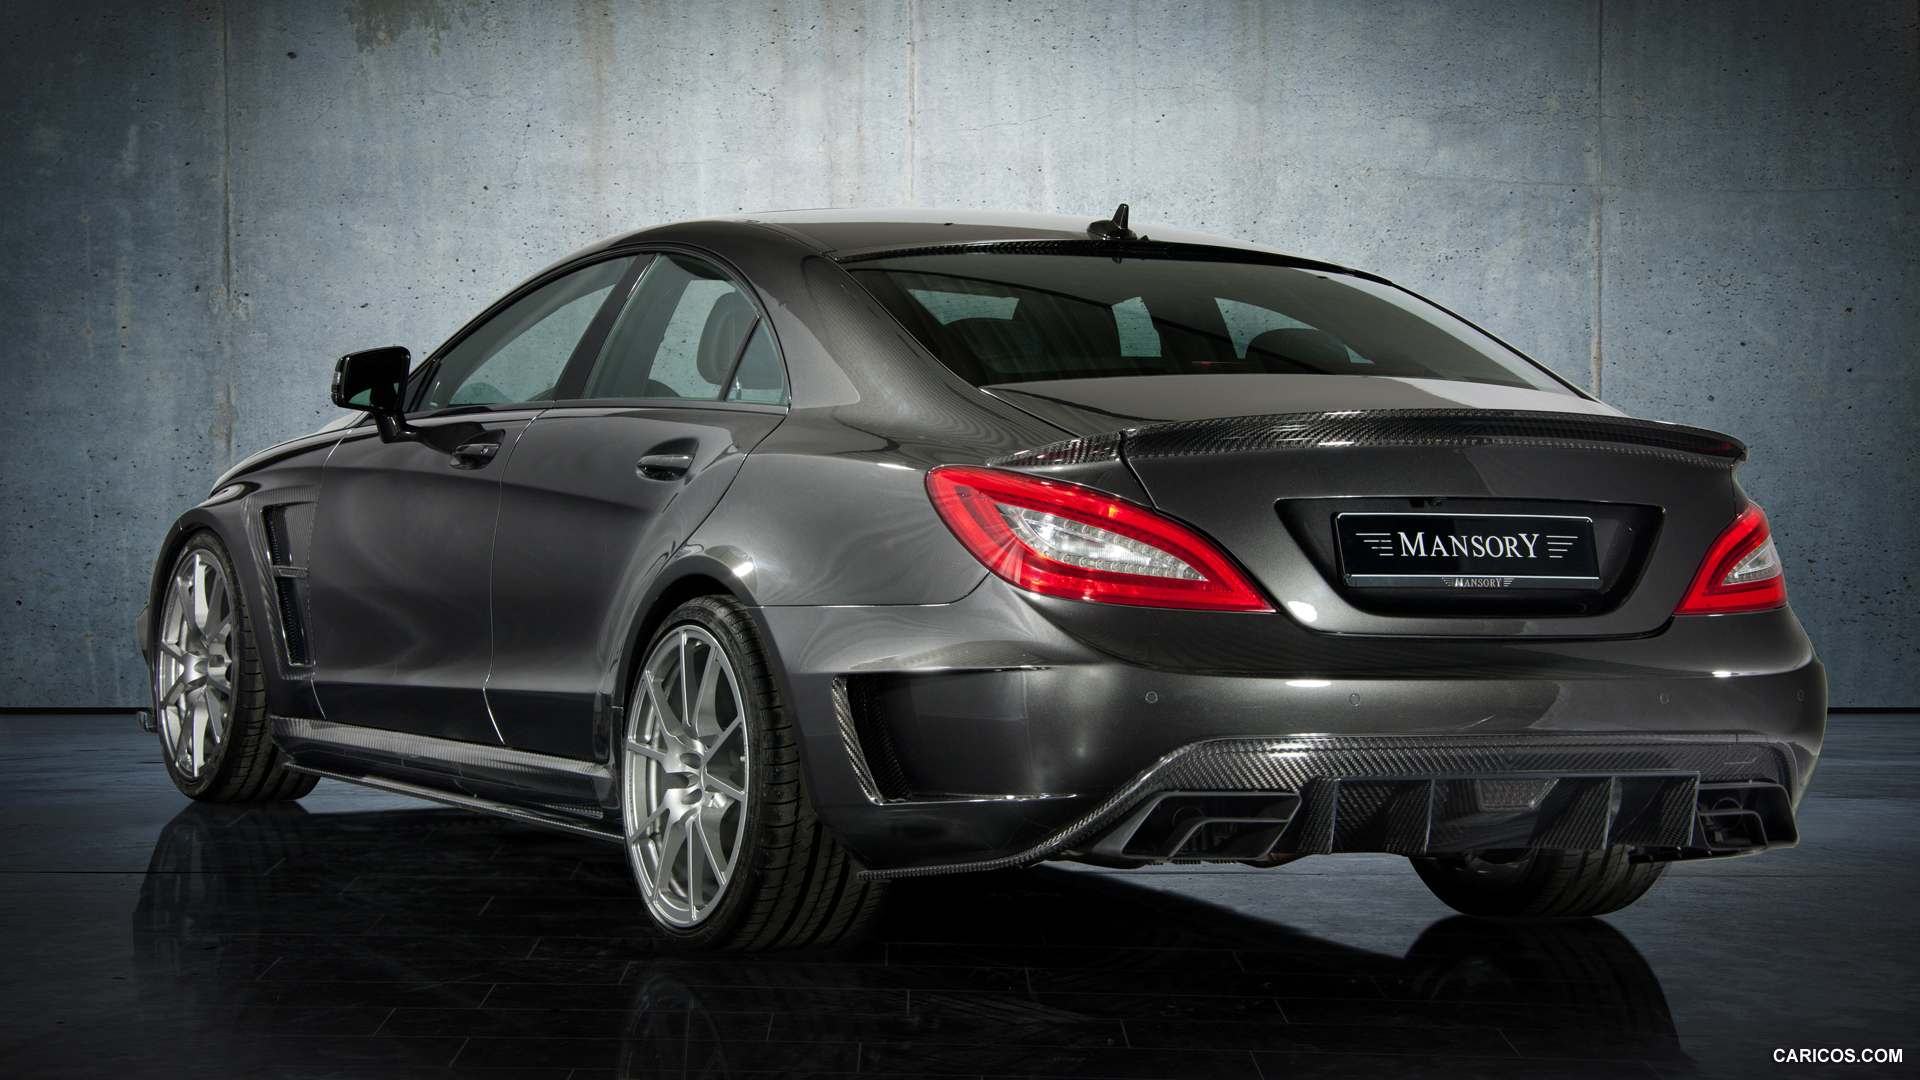 2012 Mansory Mercedes-Benz CLS63 AMG  - Rear, #3 of 5